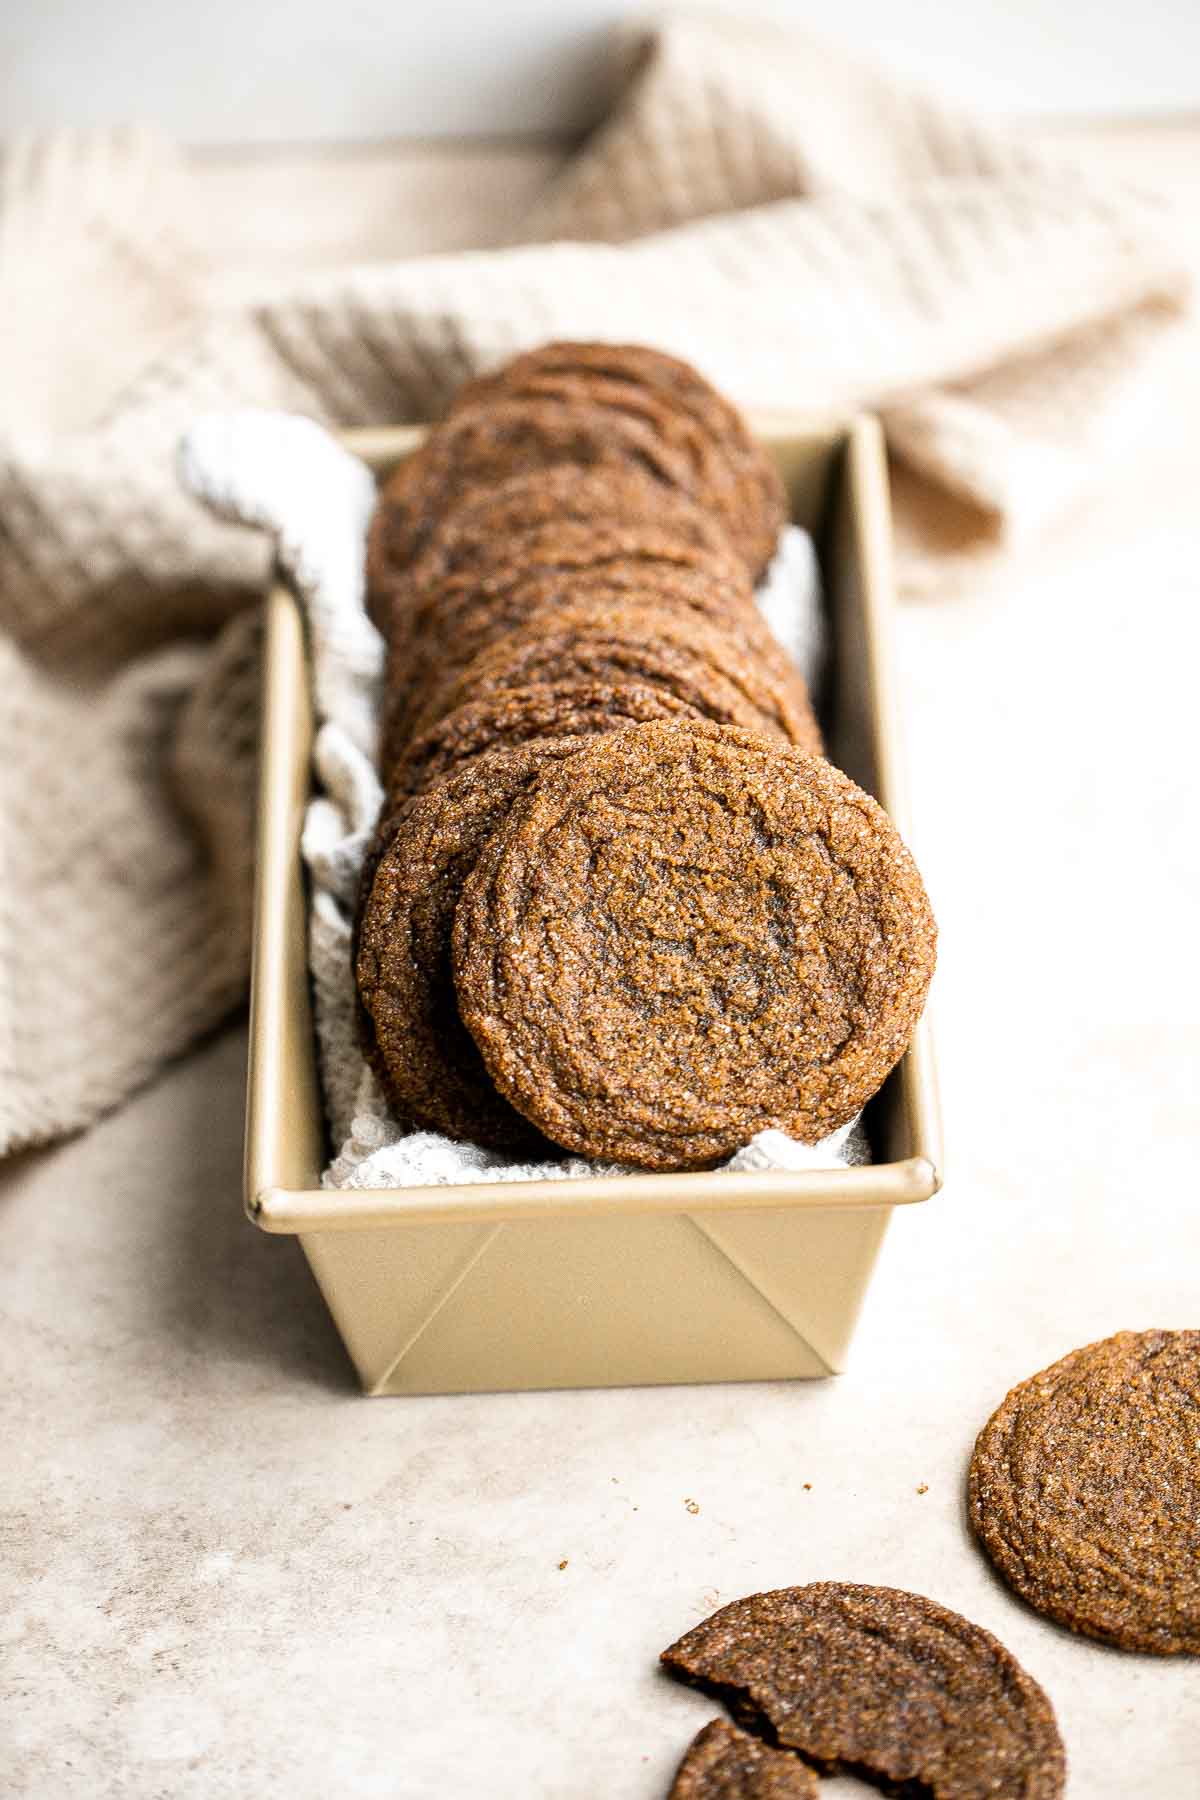 Best Gingersnap Cookies Recipe - How To Make Gingersnaps